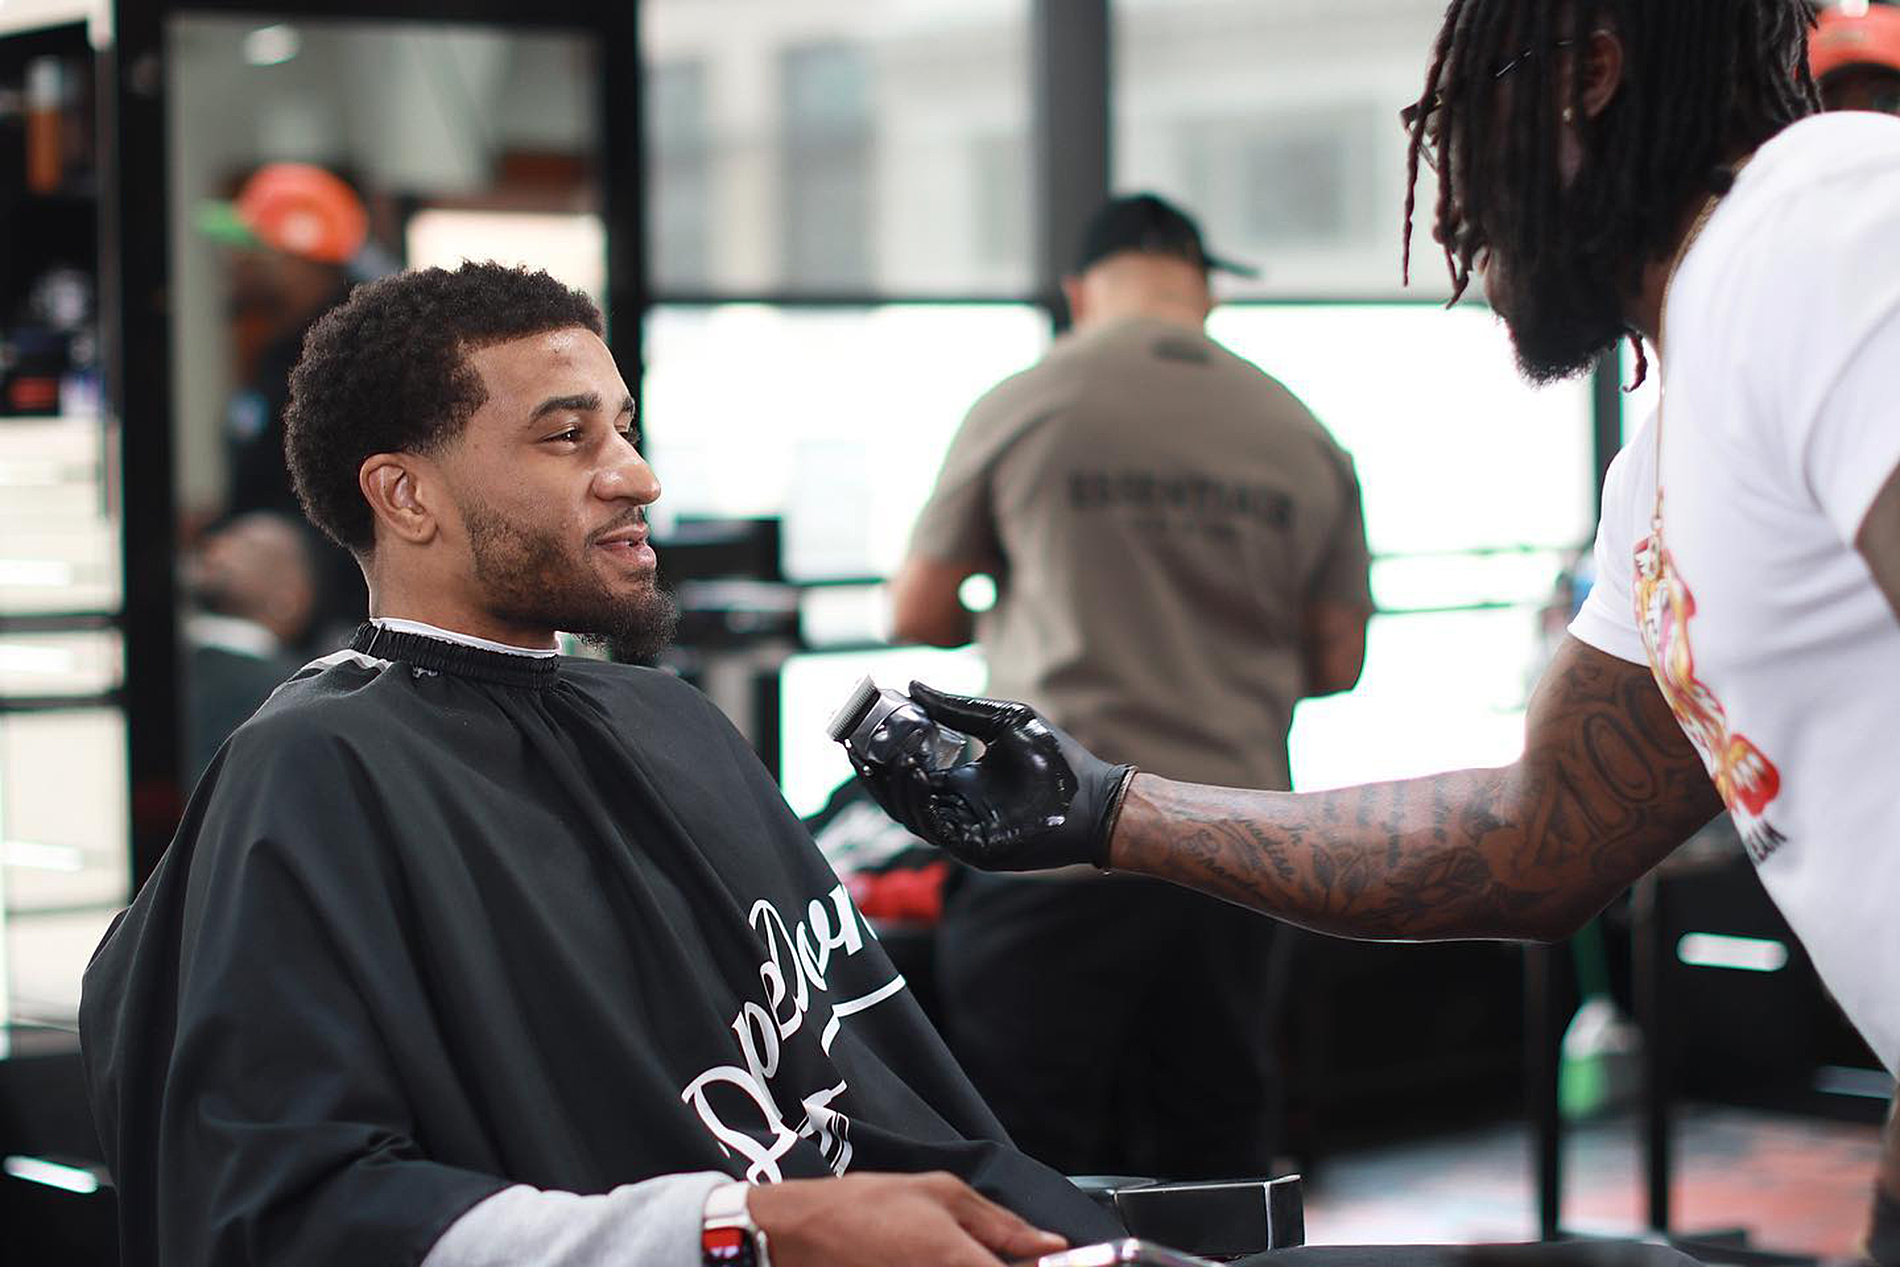 A barber with tattoos is giving a haircut to a smiling man in a salon.